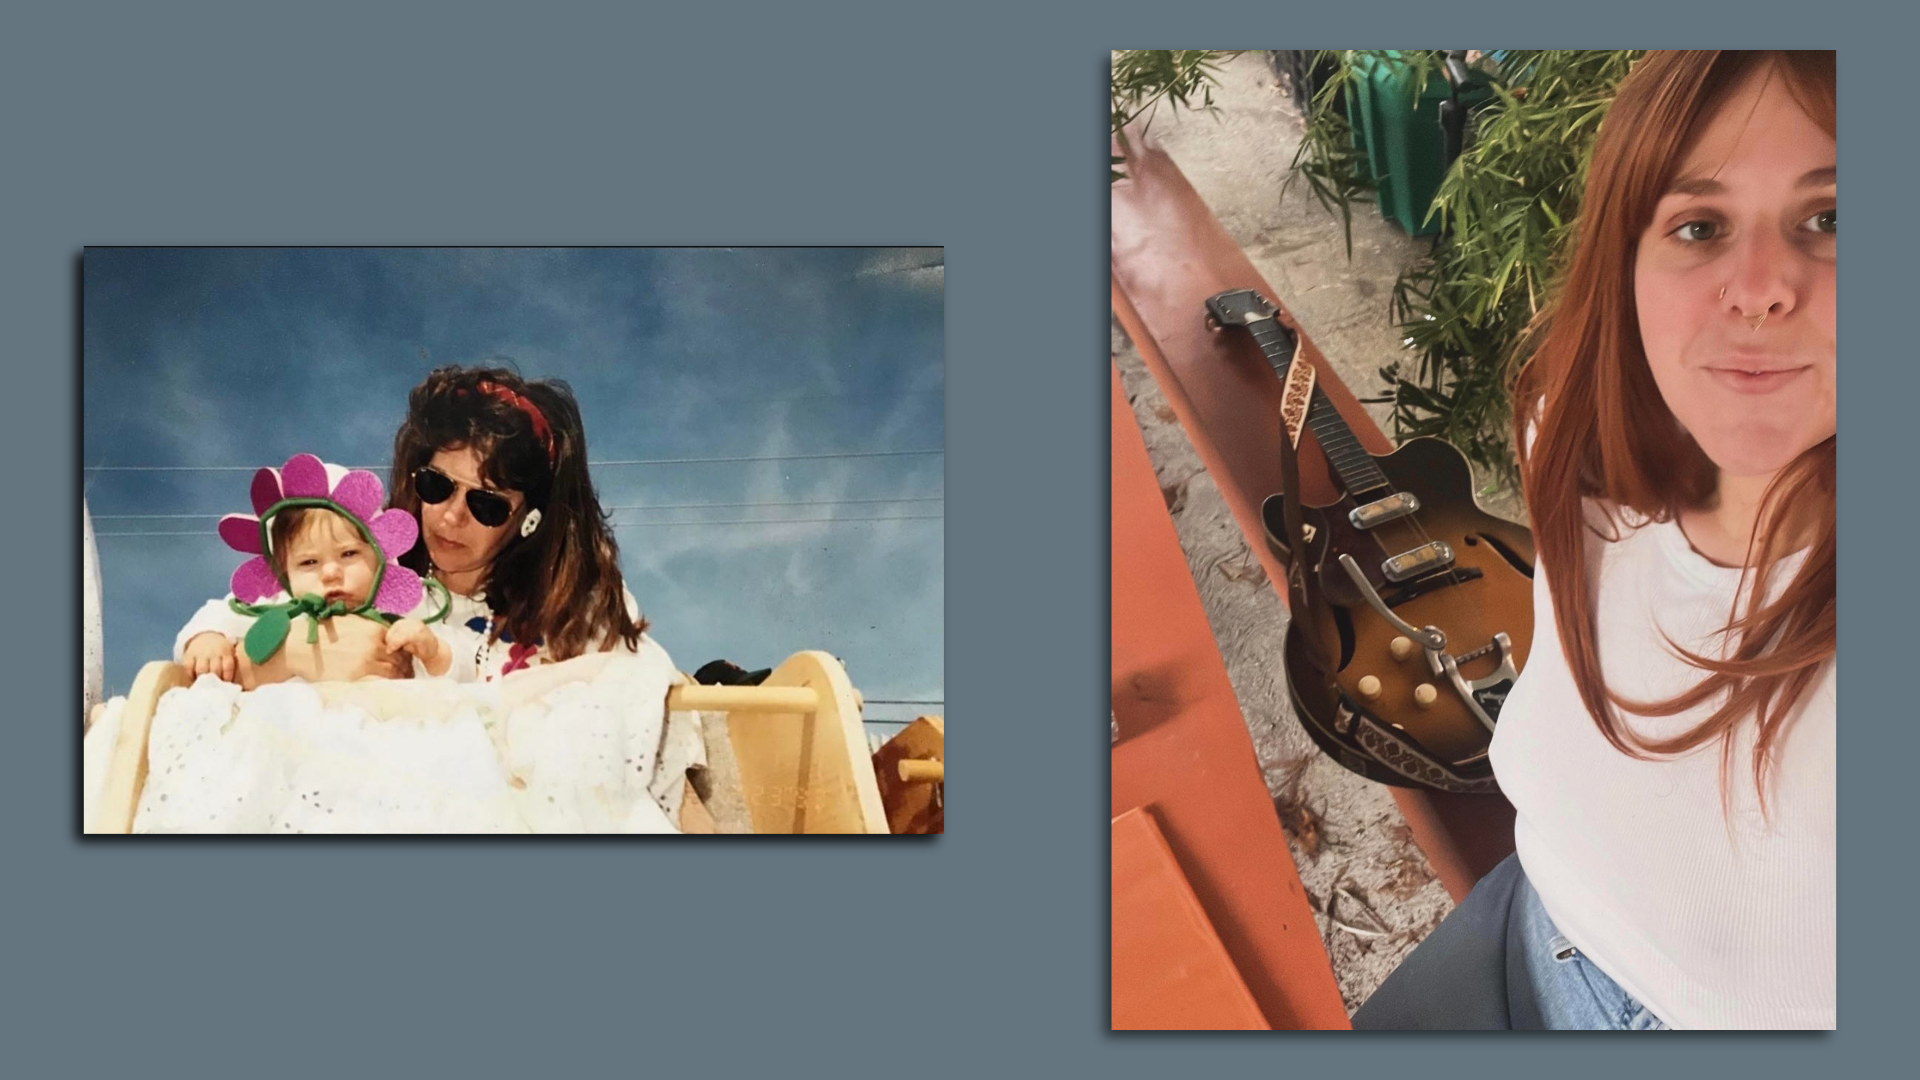 A side-by-side pair of photographs. On the left, a young girl wearing a flower headband sits at the top of a parade ladder with her mother looking over her shoulder, and on the right, a woman half-smiles in a selfie with a guitar on a bench next to her.